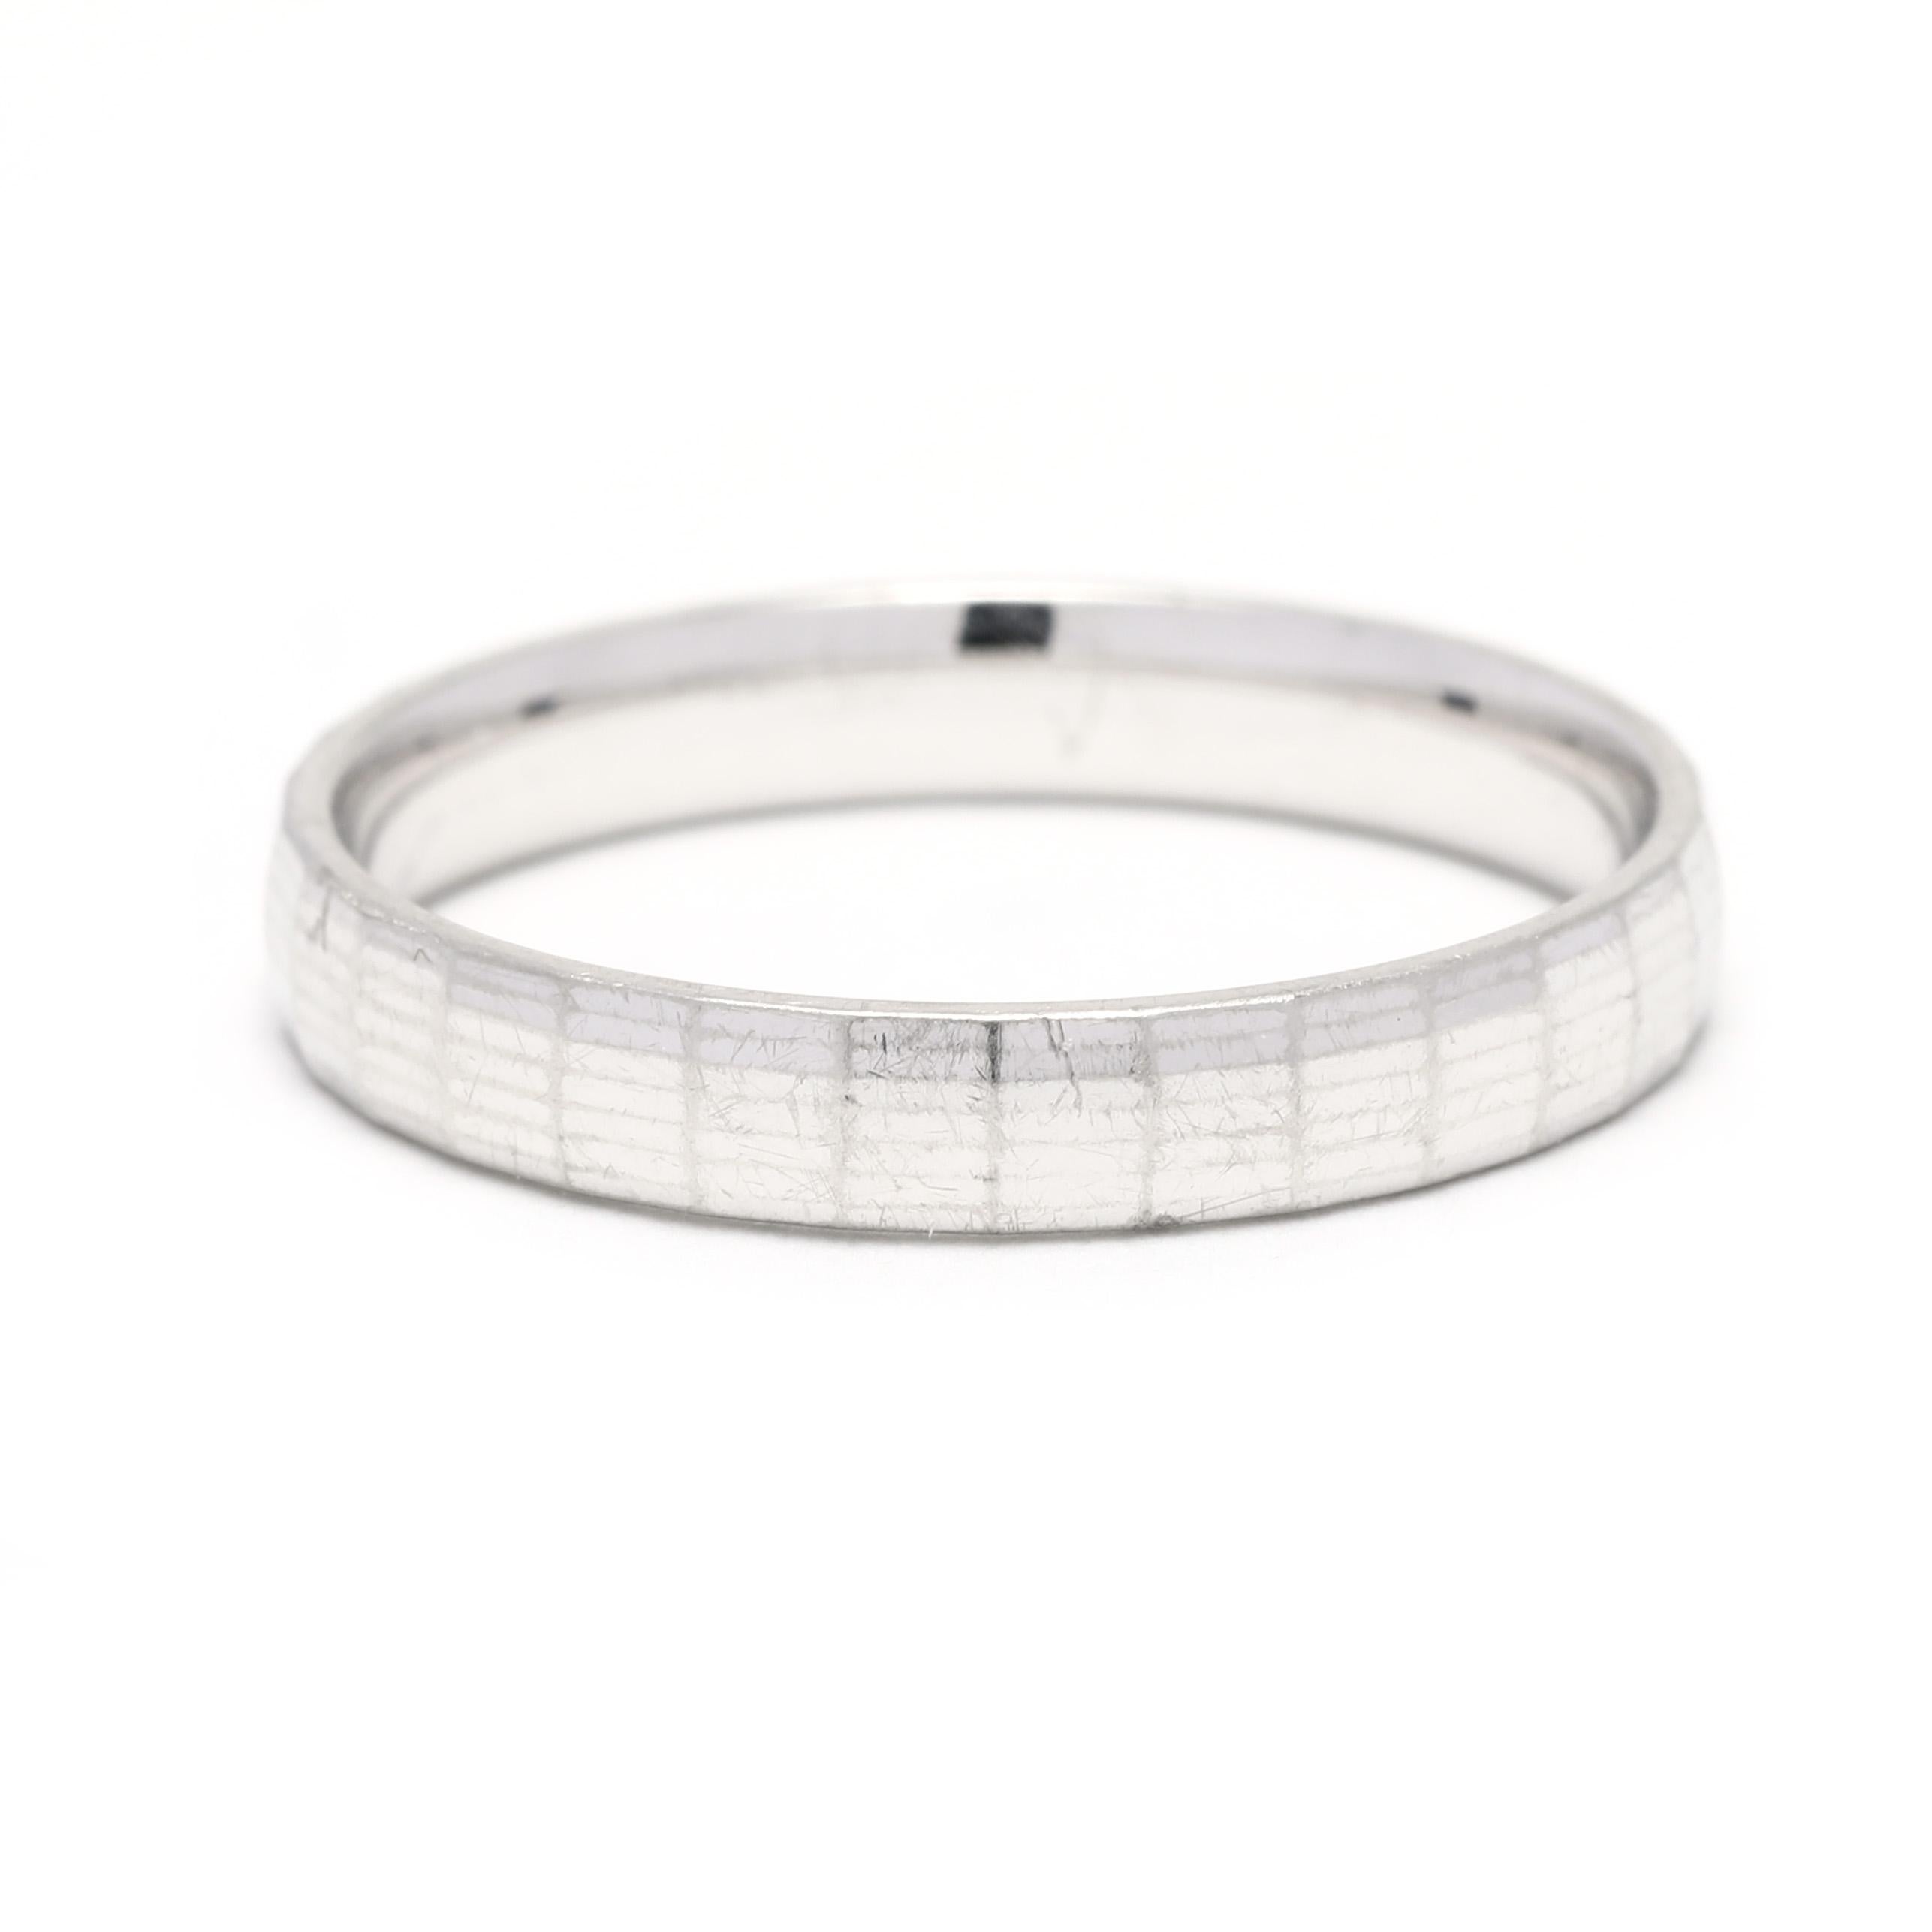 This classic faceted platinum wedding band is perfect for any occasion. Crafted from solid platinum, the timeless ring features a 3mm wide band and is size 6.25. Wear it alone for a simple, elegant look or style it with other stackable bands for a